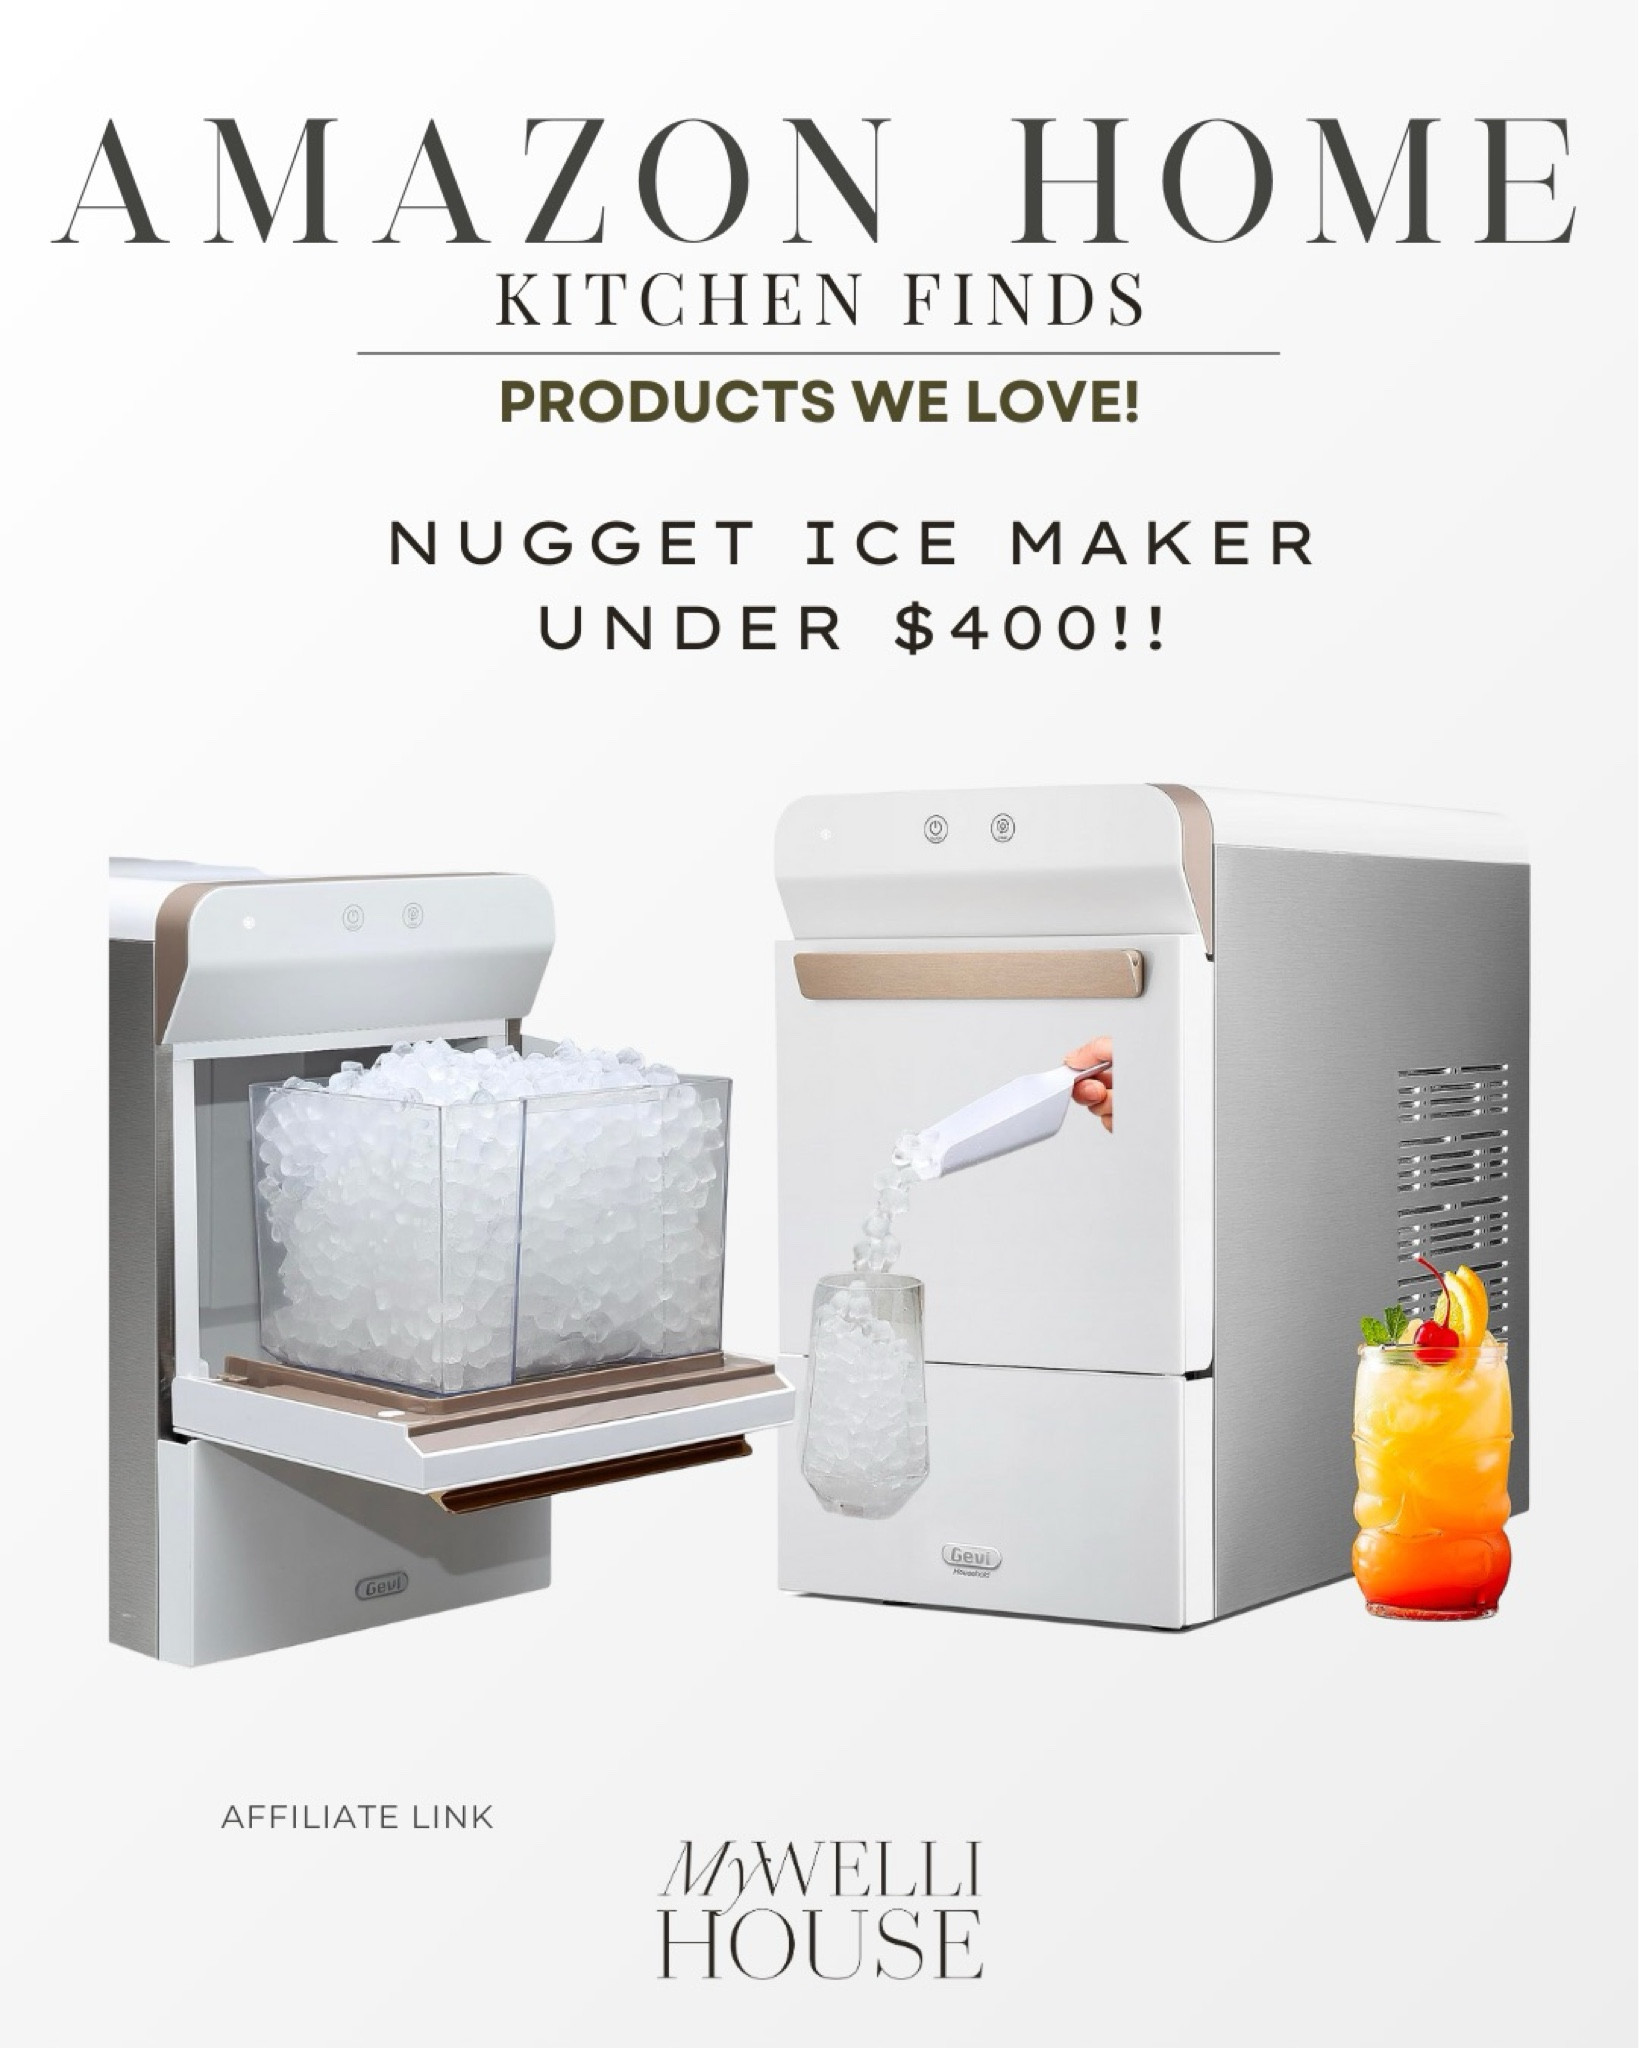  Gevi Household V2.0 Countertop Nugget Ice Maker with